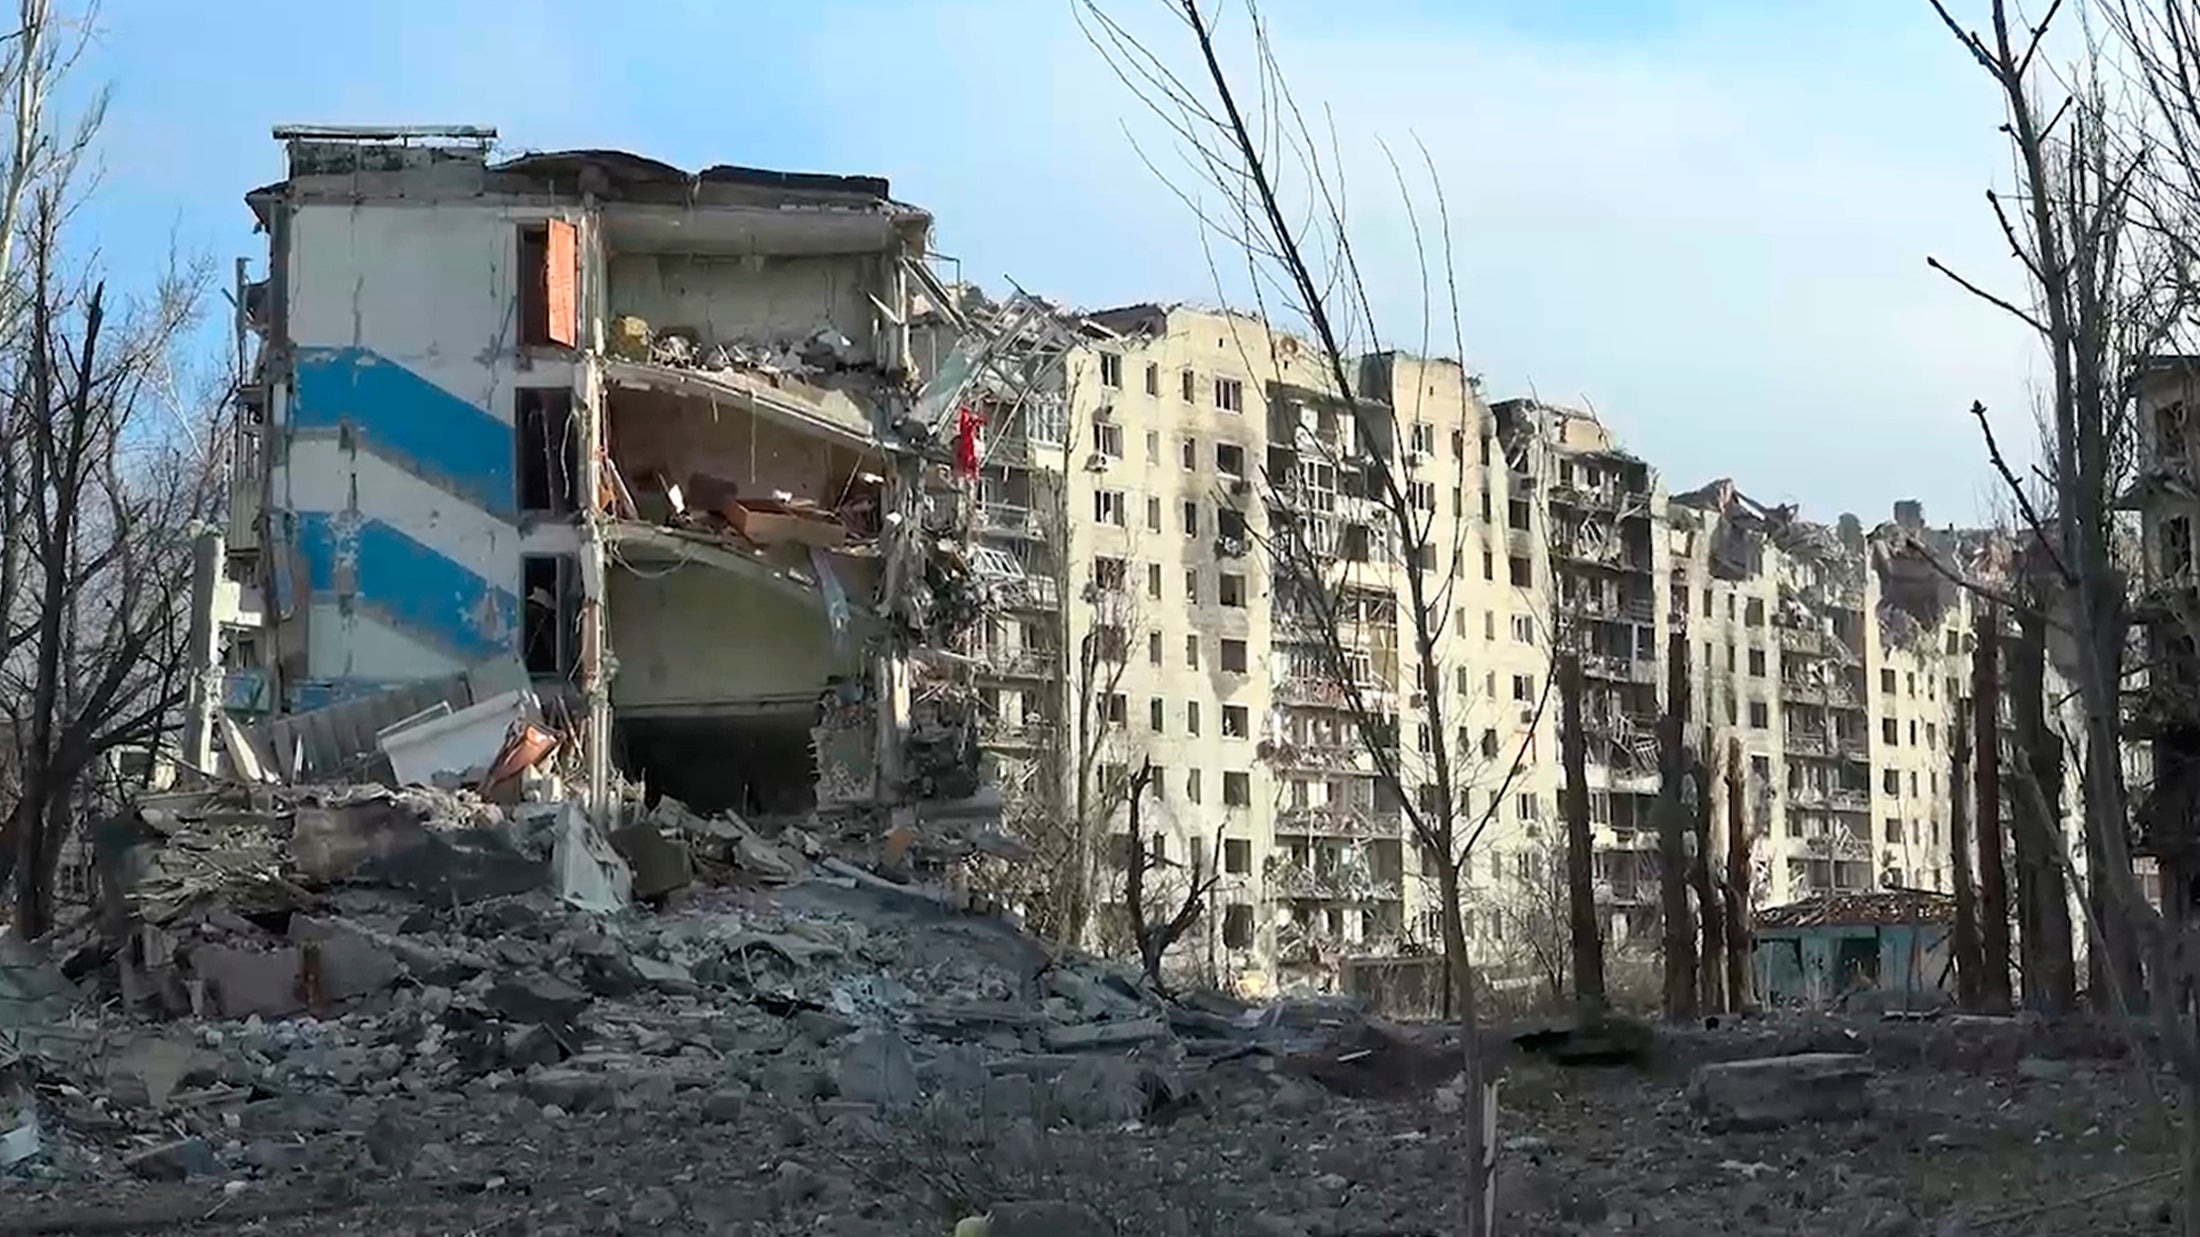 Photo taken from video released by the head of the Russian-controlled Donetsk region Denis Pushilin’s telegram channel